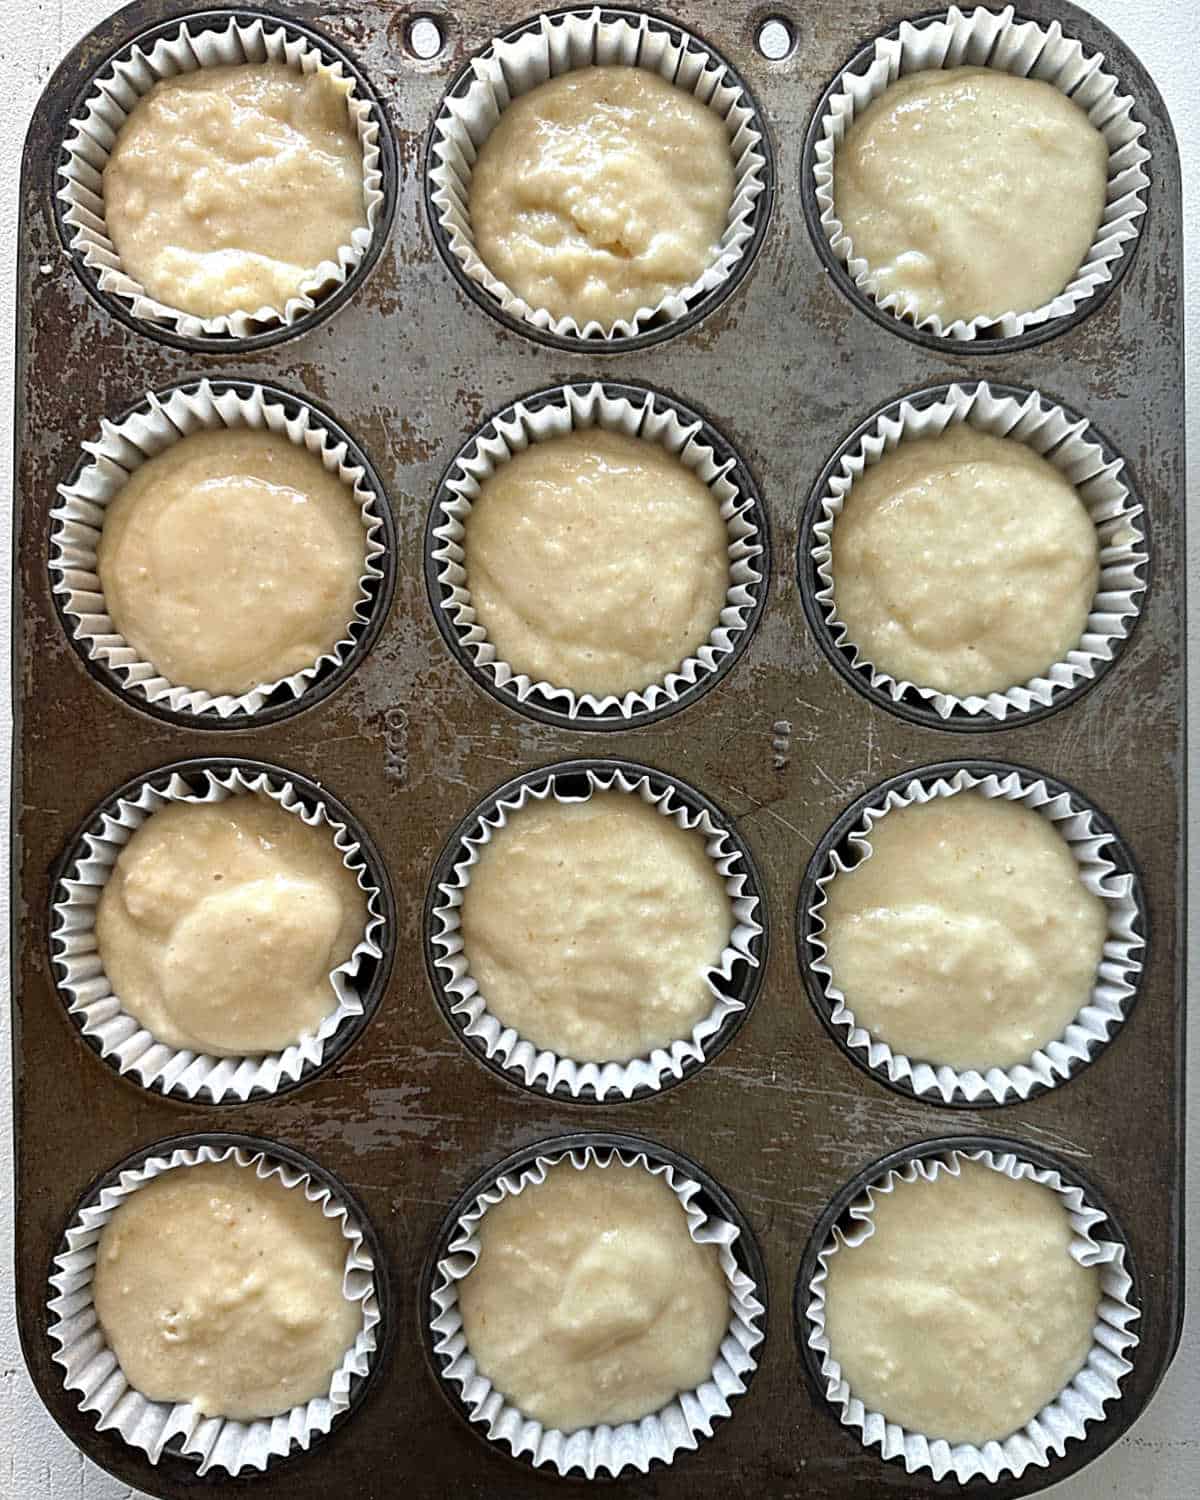 Muffin pan with twelve coconut muffins in paper liners before baking.